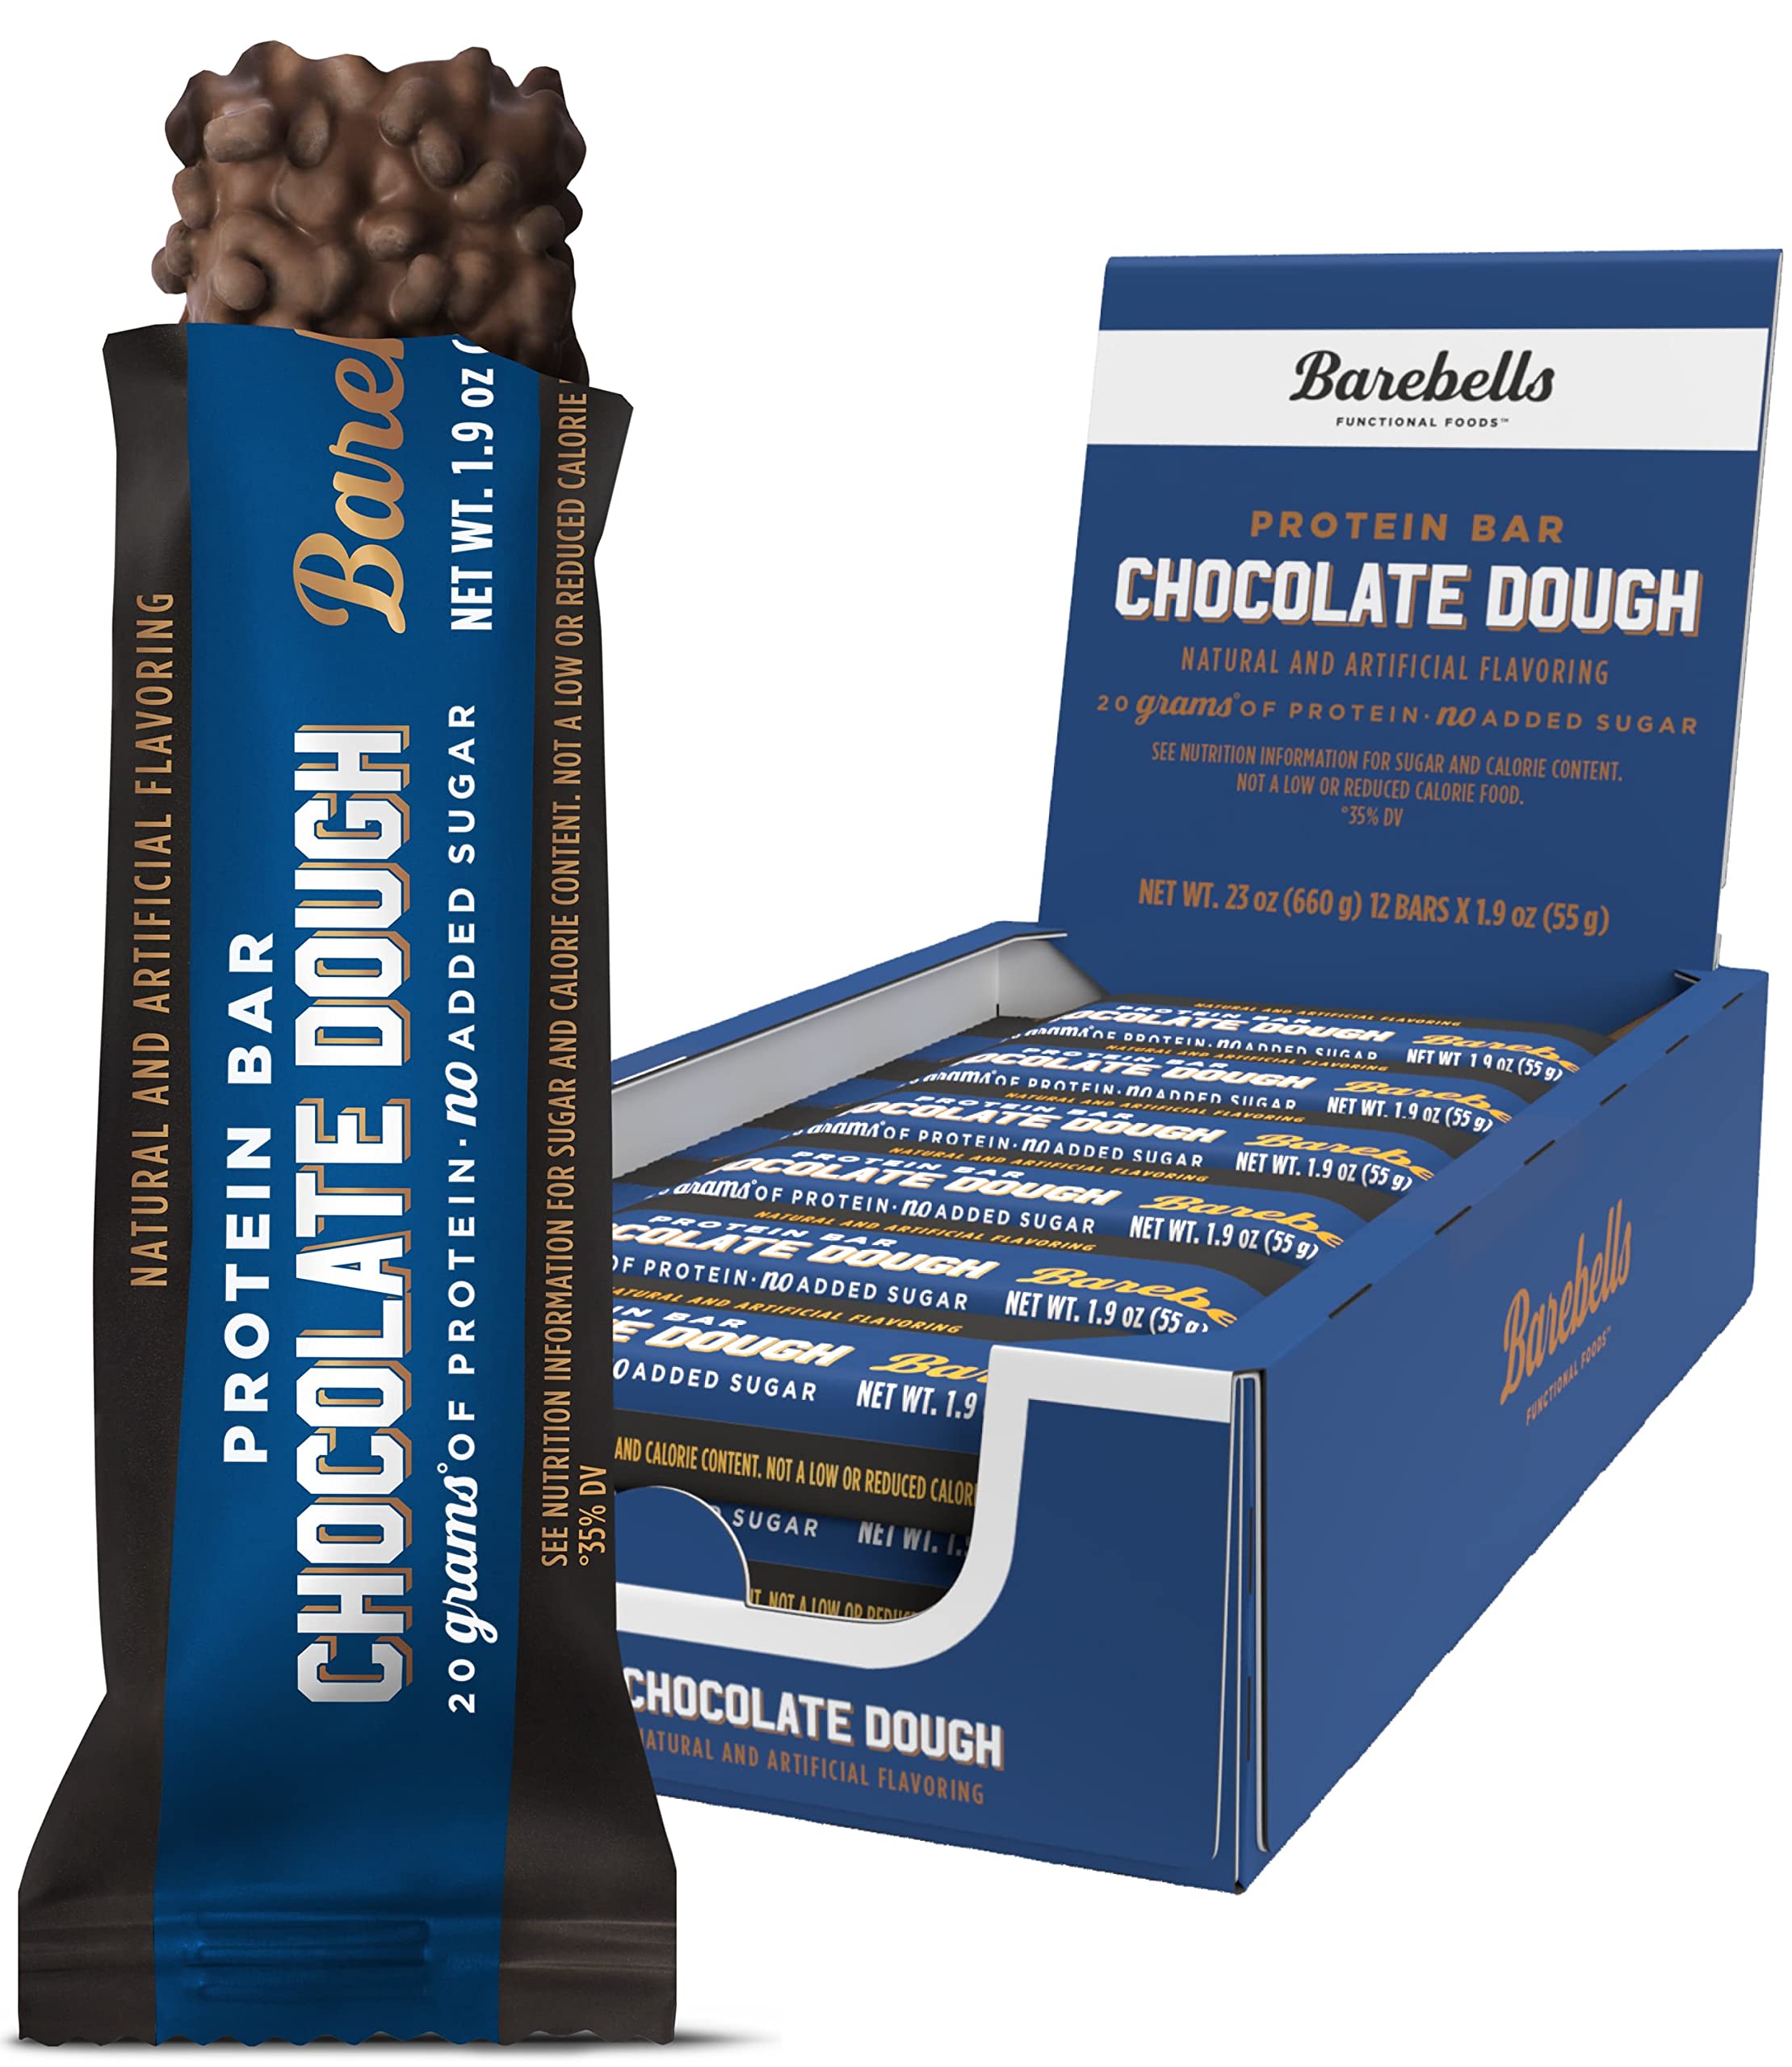 Barebells Protein Bars Chocolate Dough - 12 Count, 1.9oz Bars - Protein Snacks with 20g of High Protein - Chocolate Protein Bar with 1g of Total Sugars - On The Go Protein Snack & Breakfast Bars